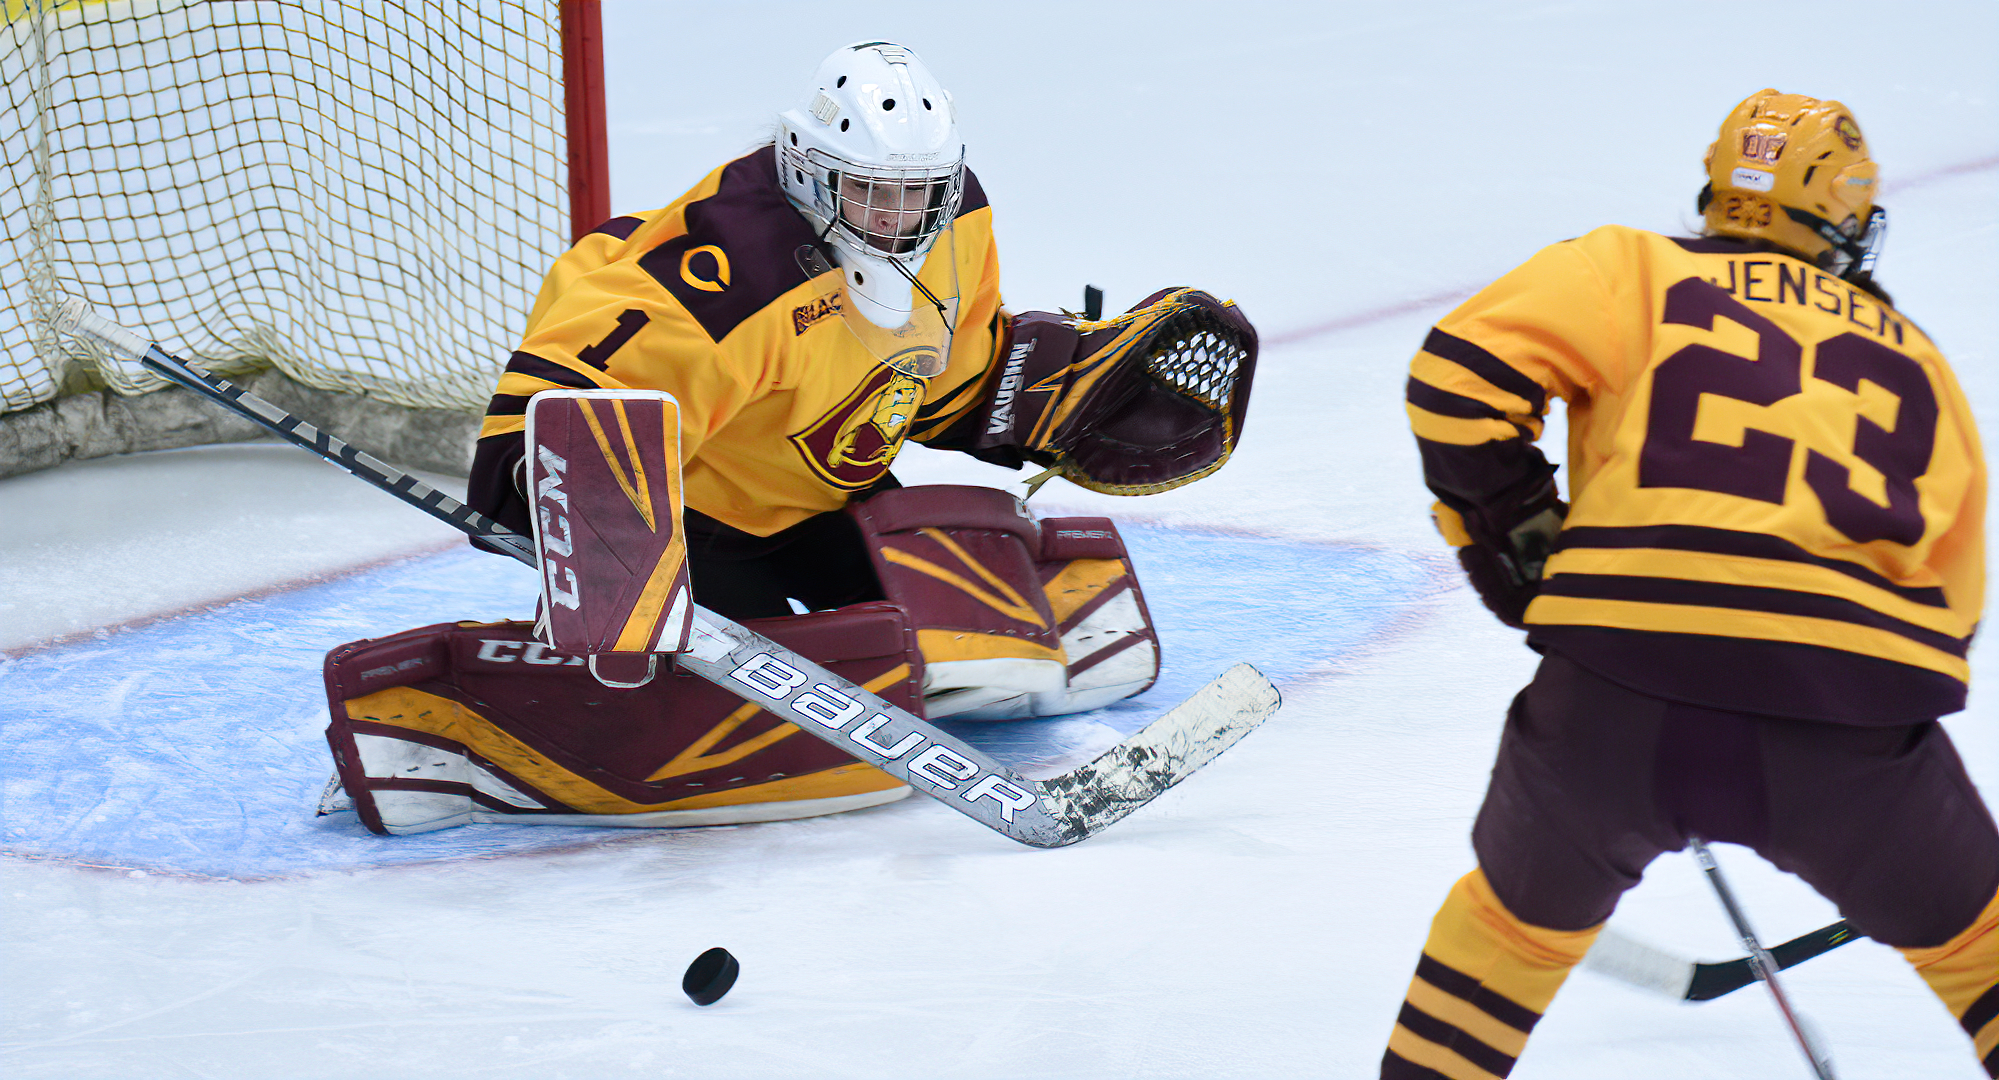 Kiana Flaig made 32 saves in the Cobbers' series finale with Augsburg. She now has 170 saves on the season which is third most in the MIAC.